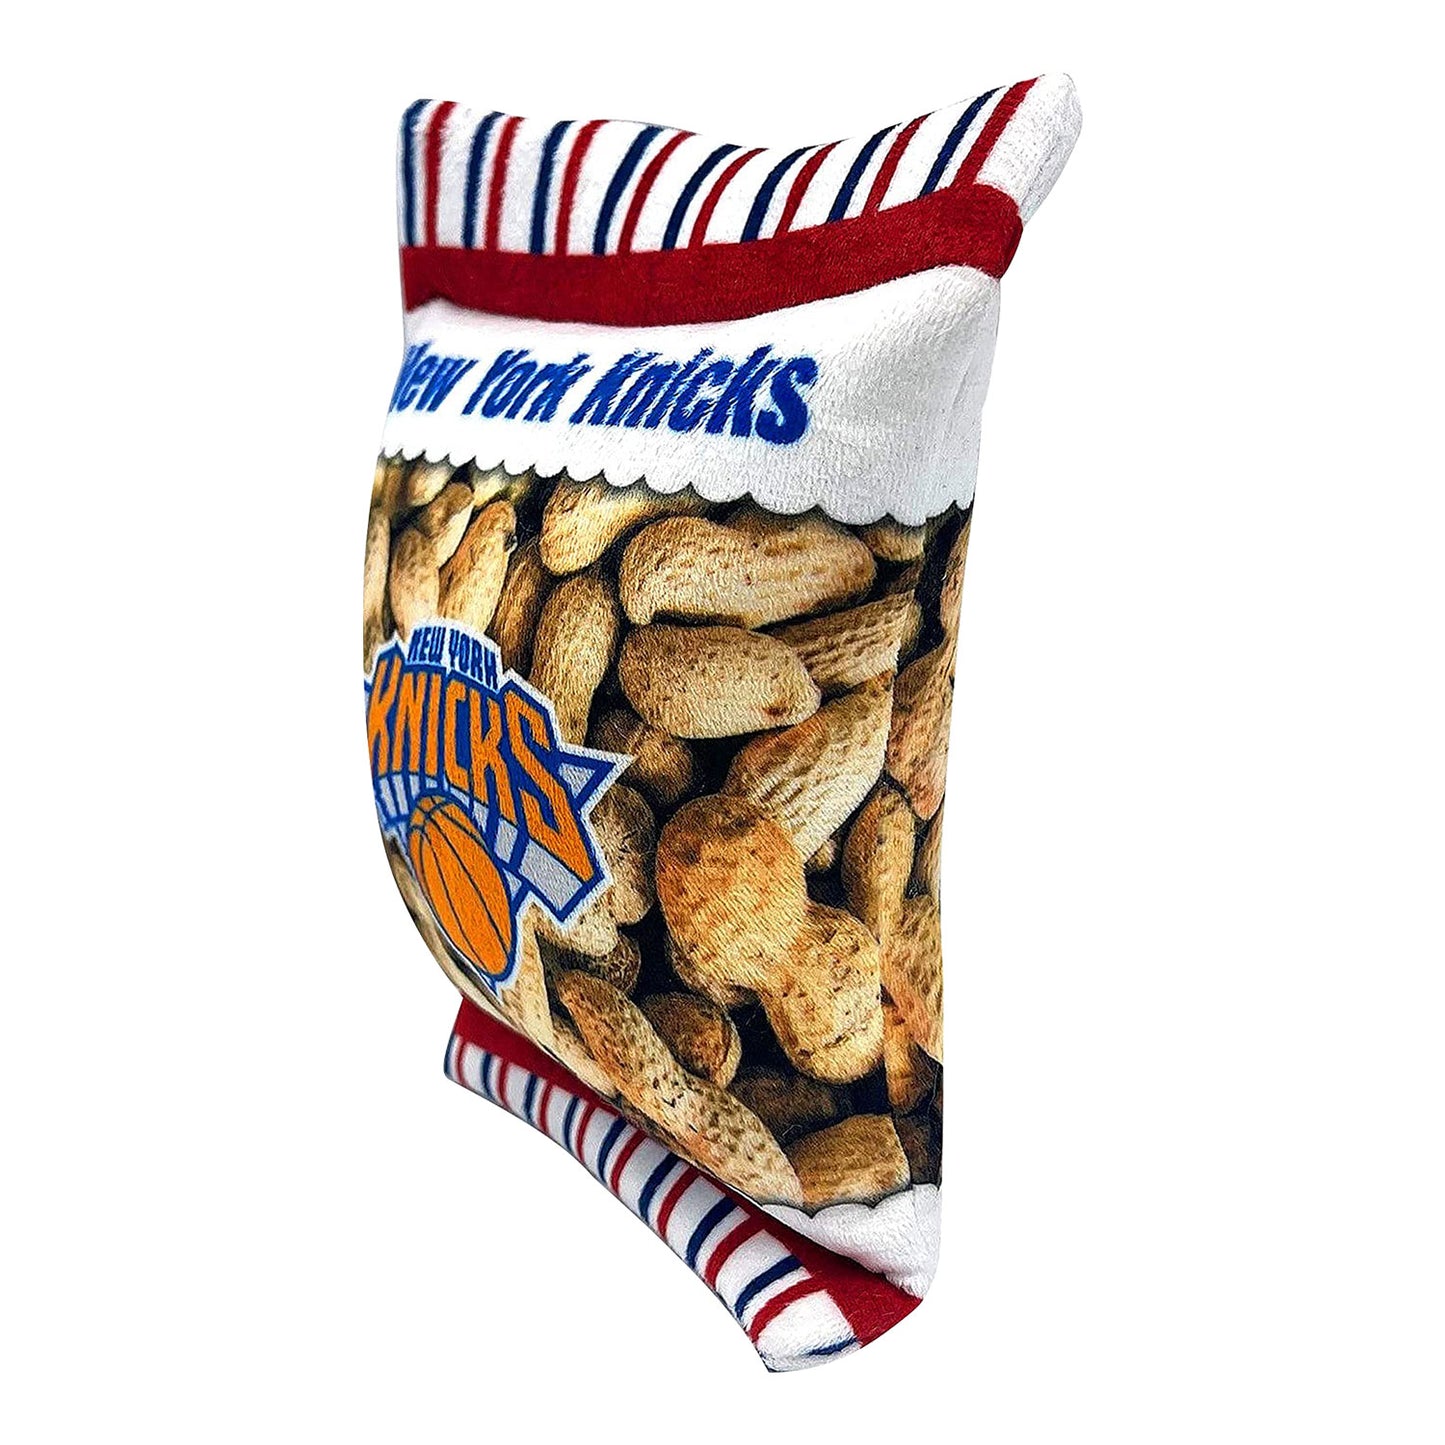 New York Knicks Pet Peanut Bag Toy - In White - Left Angled View